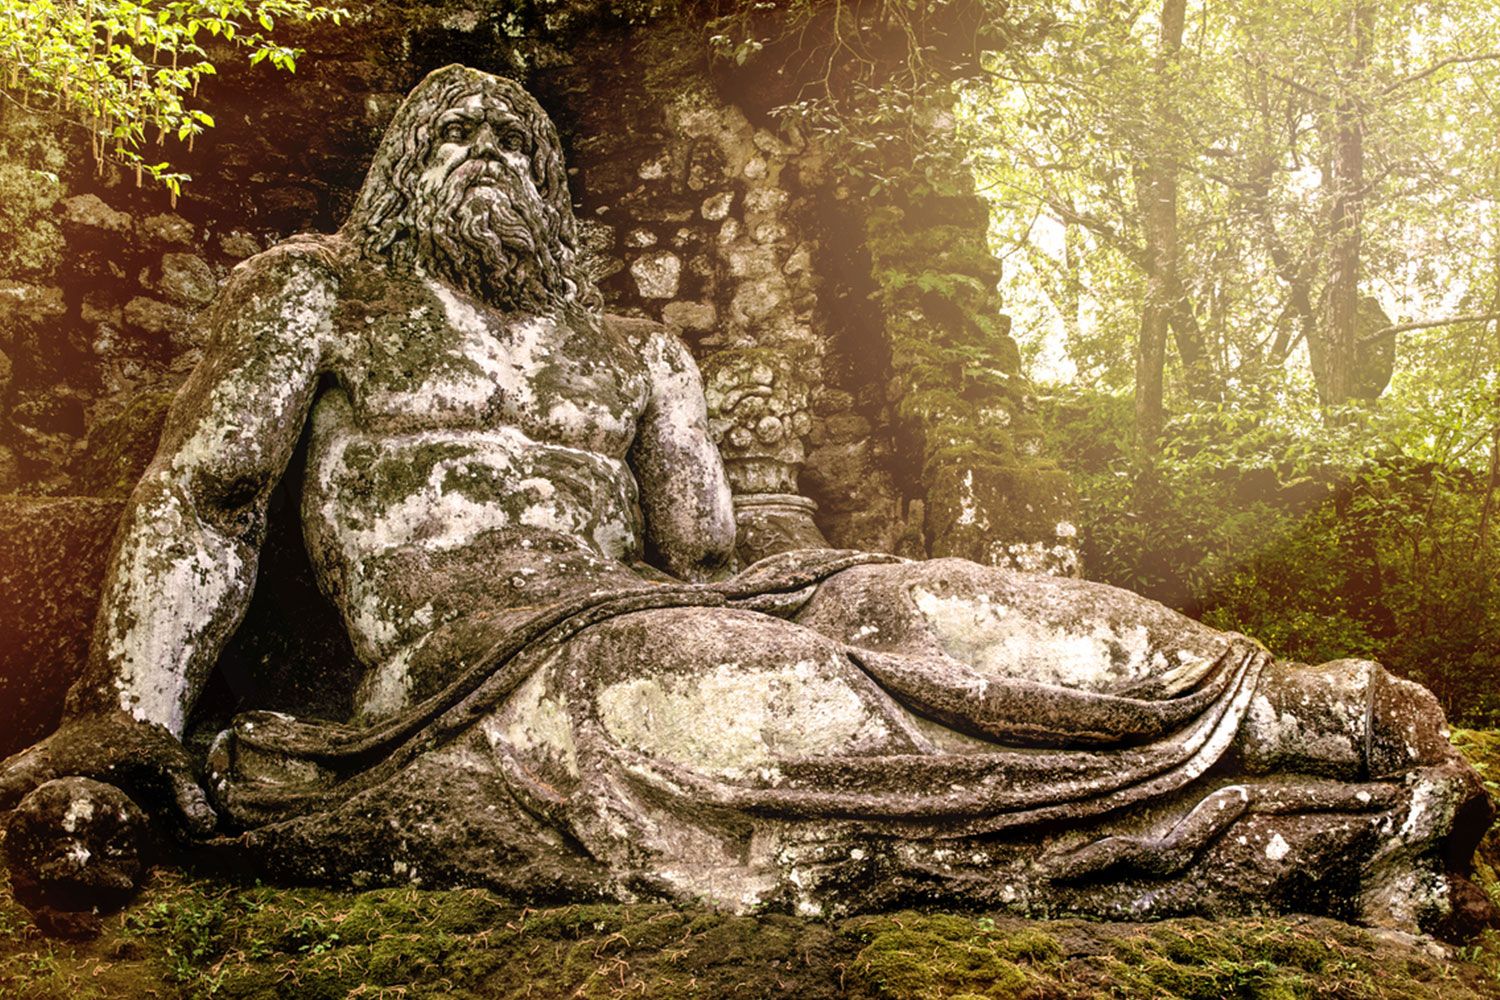 Giants reside in the Sacred Woods at Bomarzo